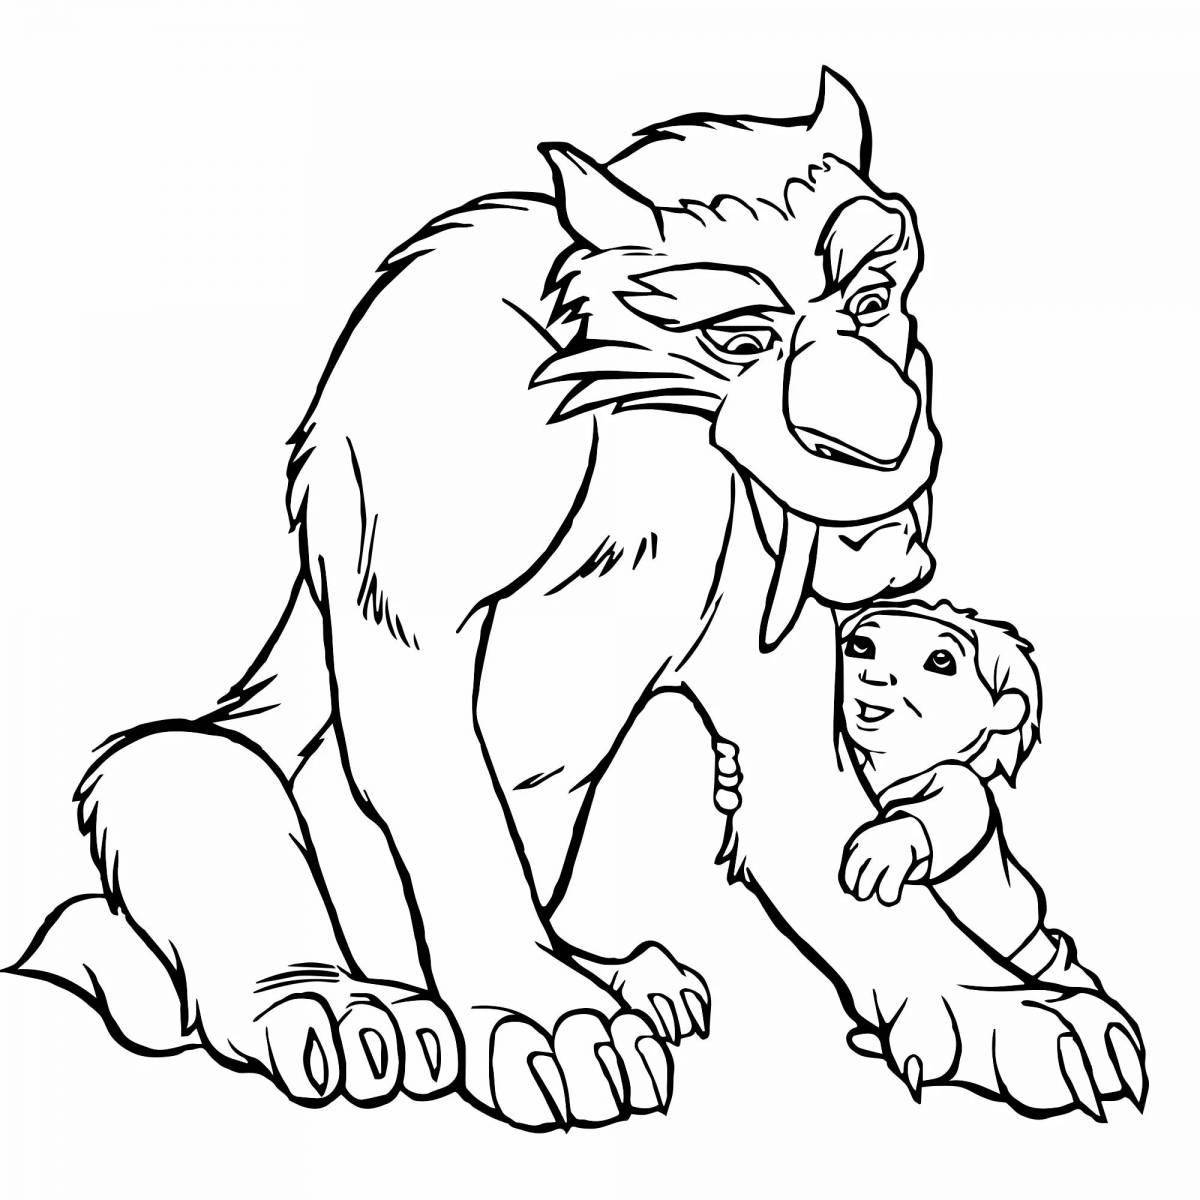 Attractive saber-toothed tiger coloring pages for kids